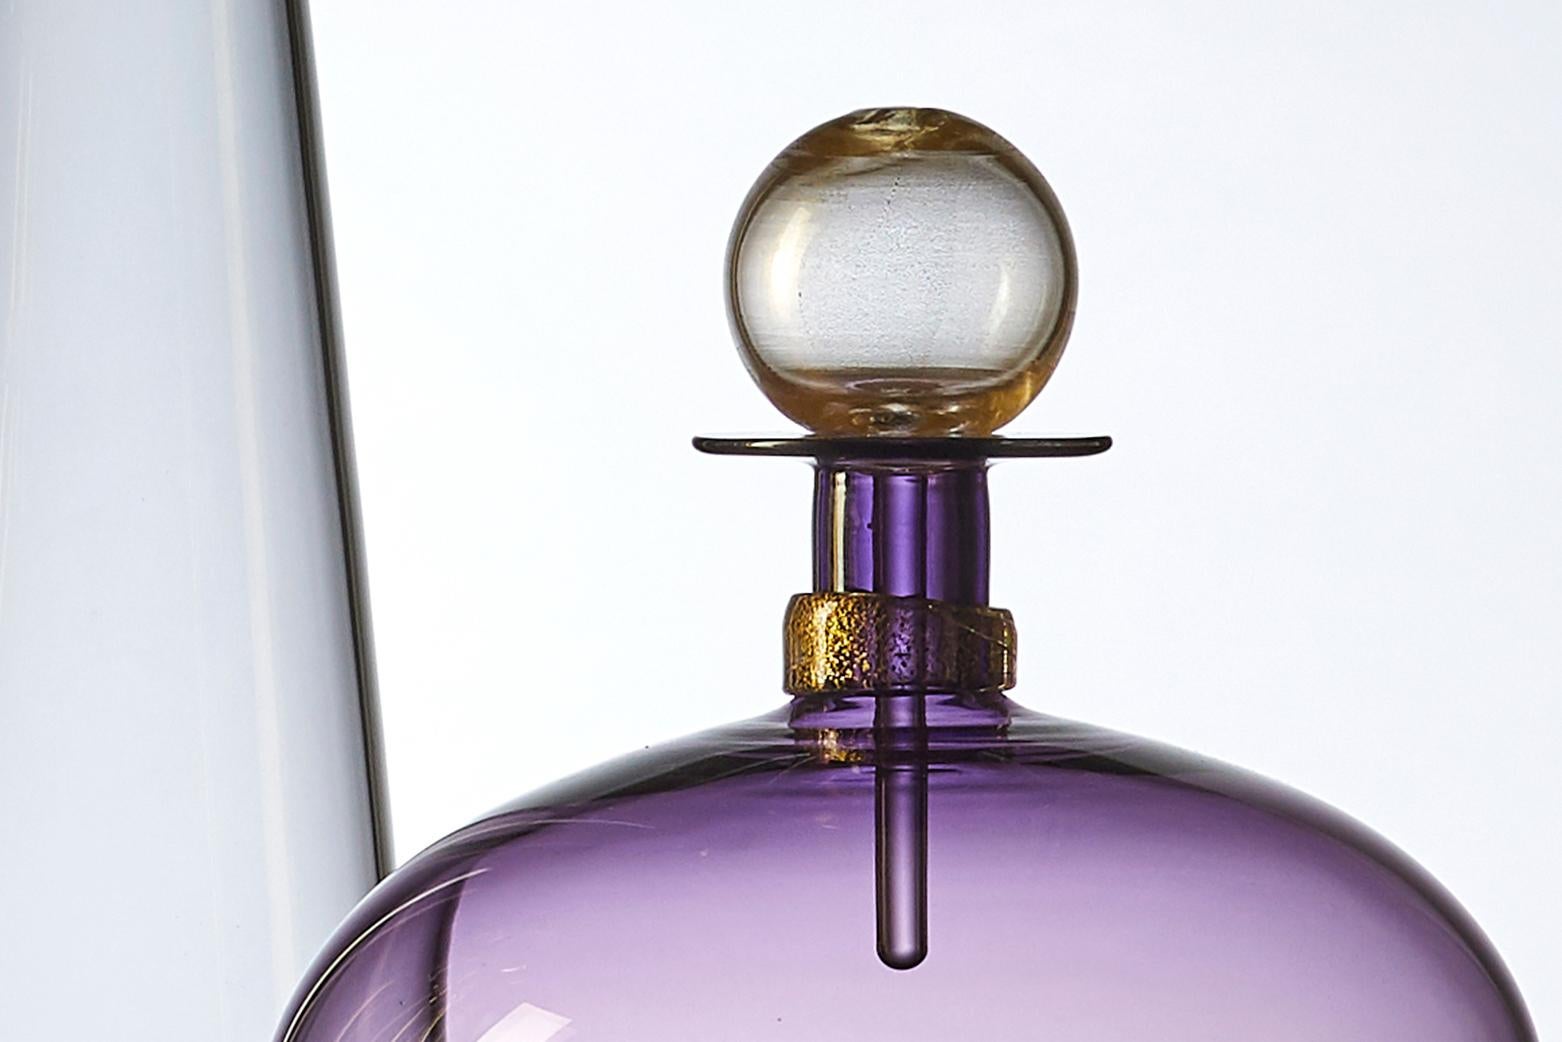 The modernist hand blown Jewel Bottle by Vetro Vero features tinted violet glass, and shimmering gold details. Inspired by apothecary collections and decanters of Mid-Century Modern design, the light purple carafe makes a standalone statement or a